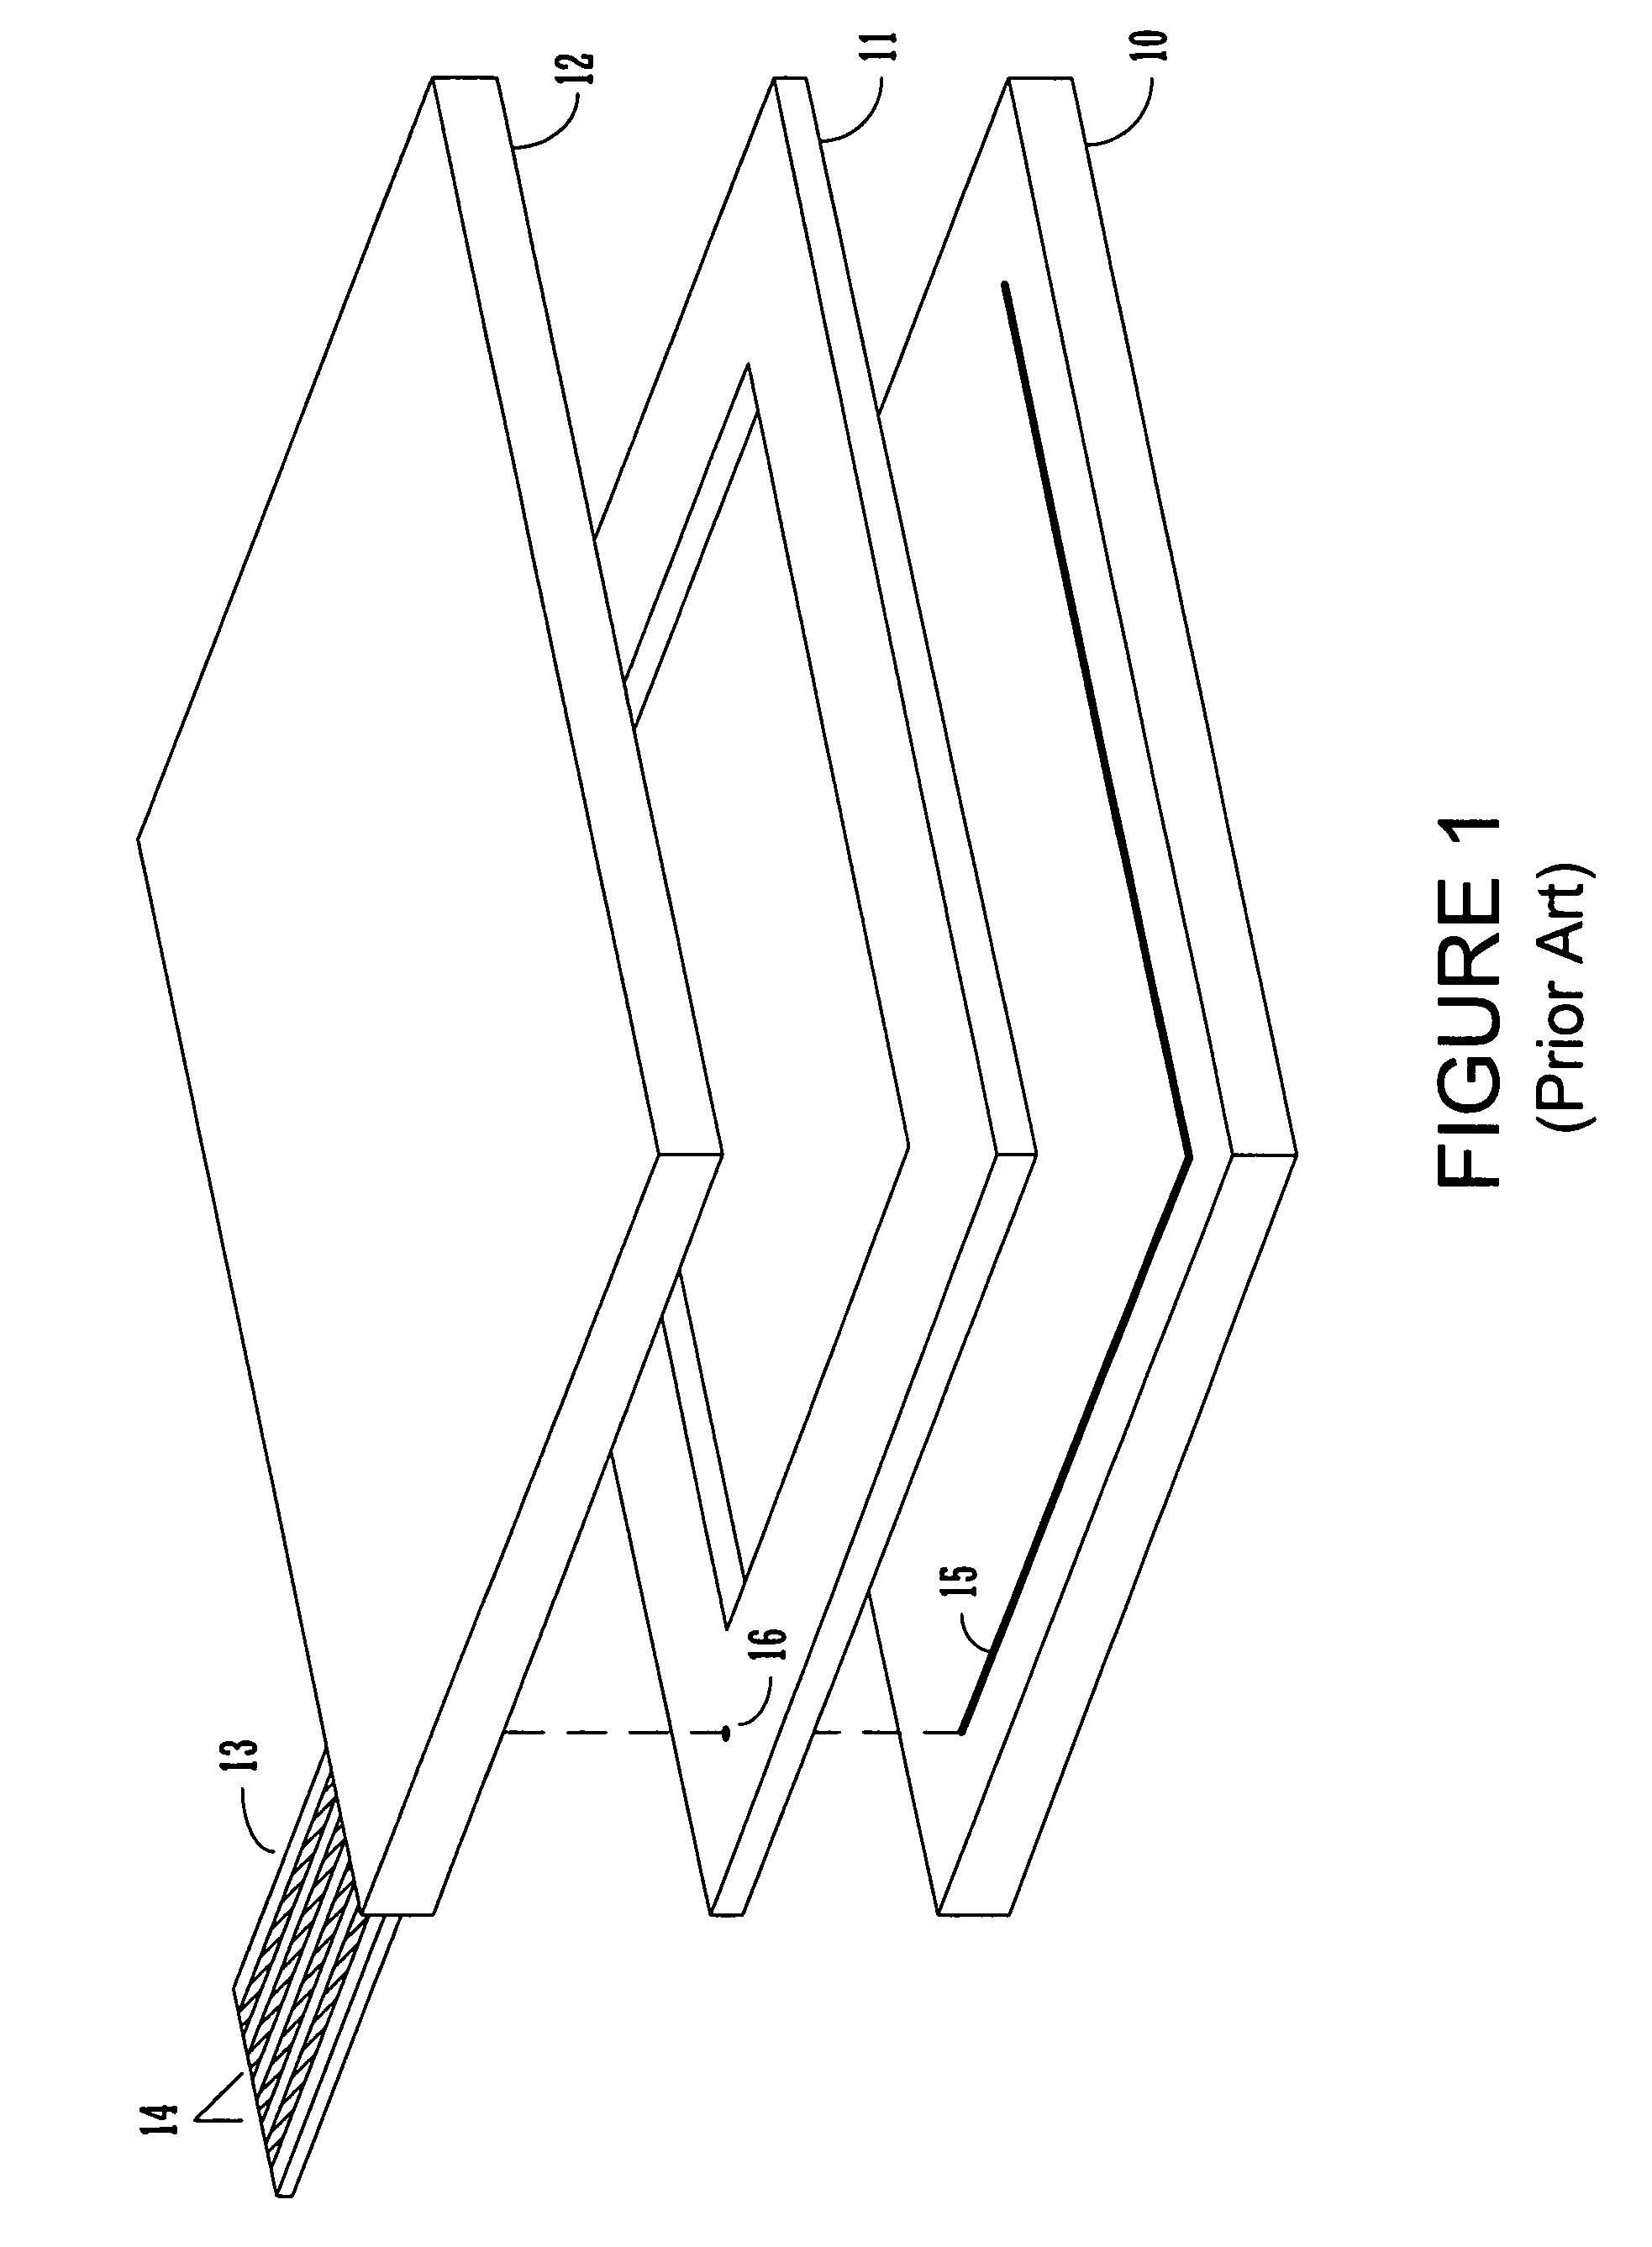 Compact integrated touch panel display for a handheld device